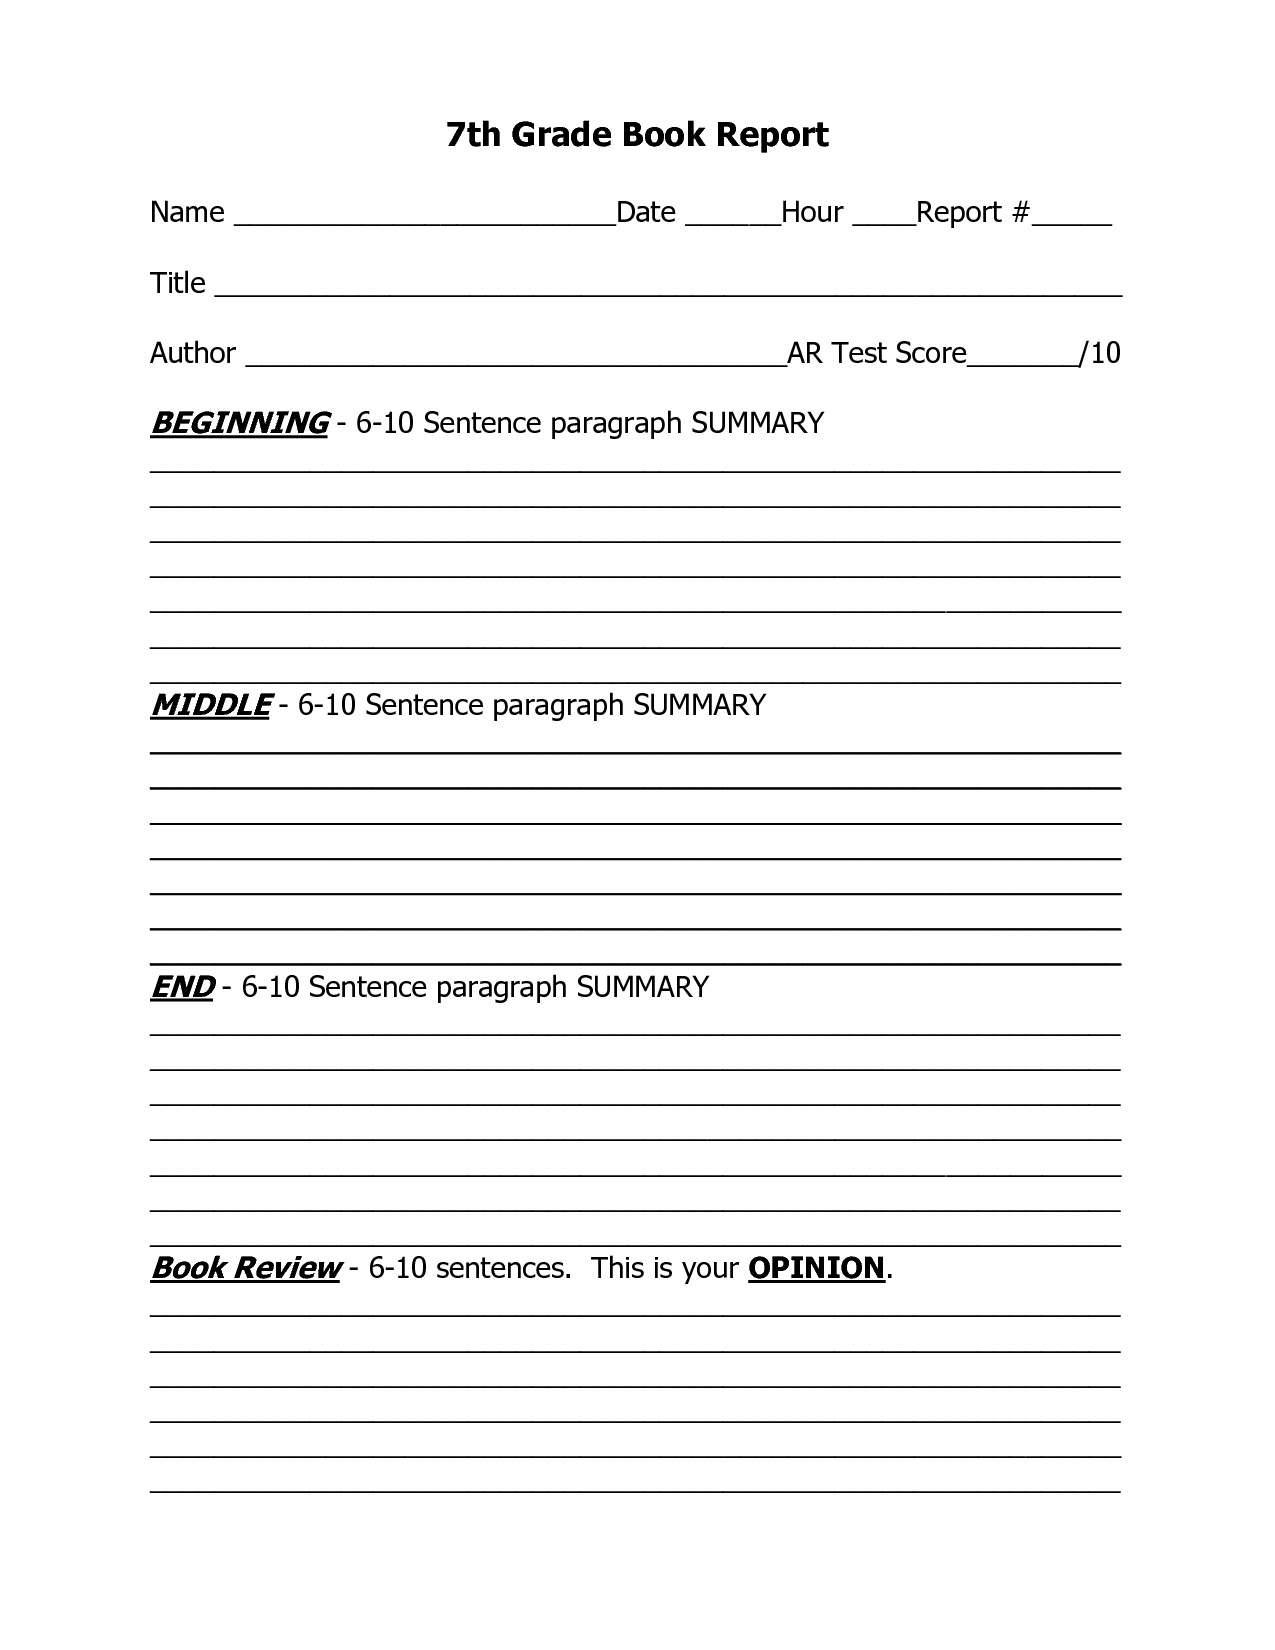 7Th Grade Book Report Outline Template | Kid Stuff | Book Report - Free Printable Book Report Forms